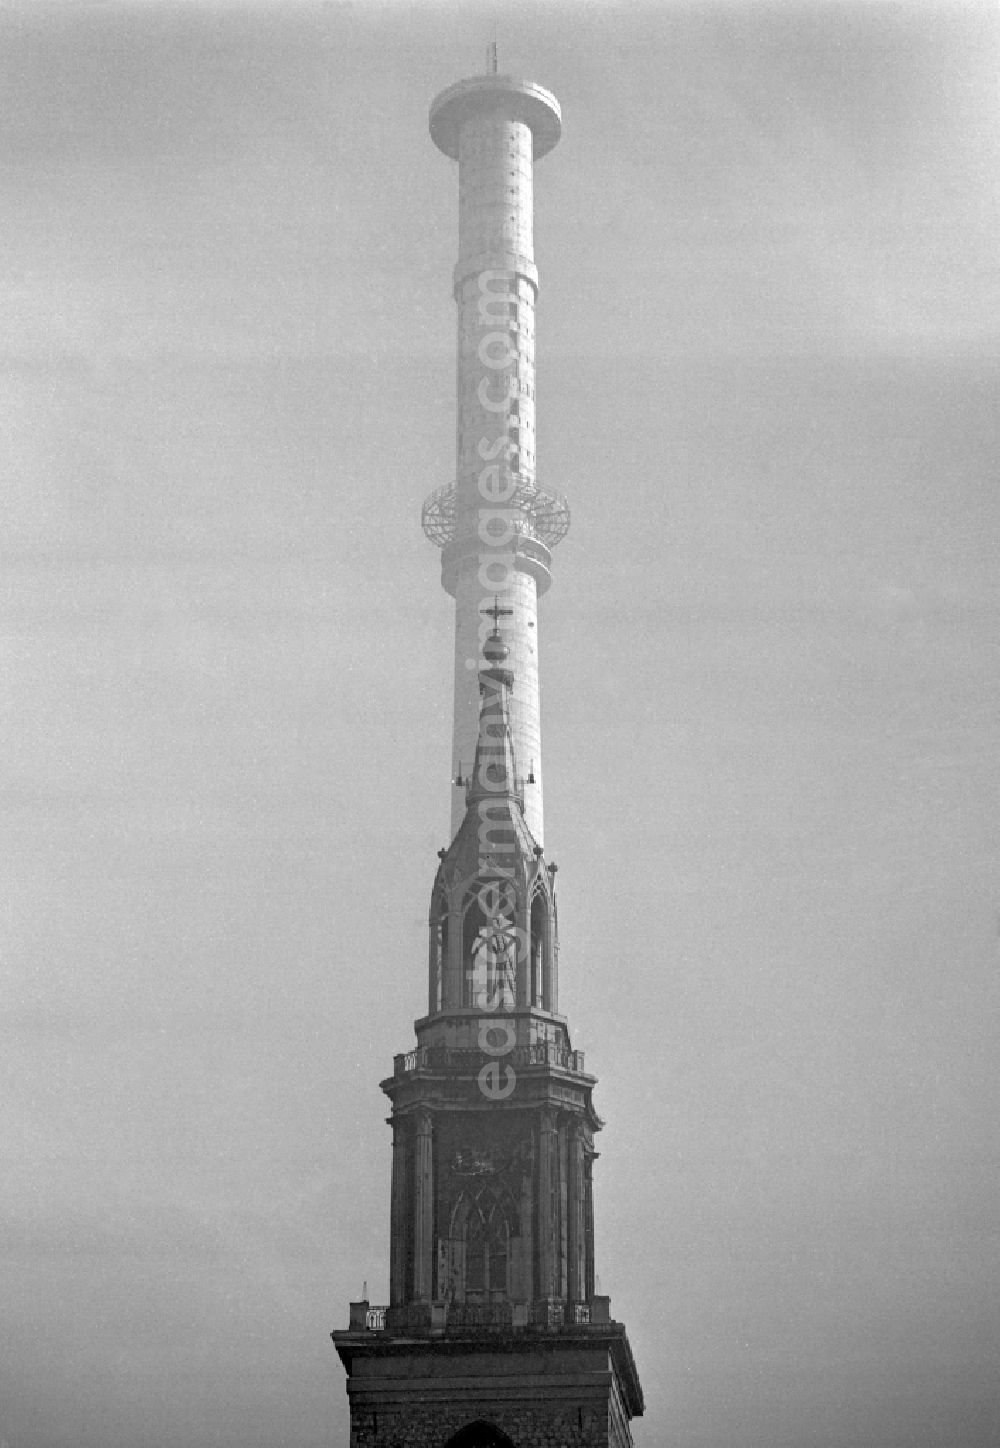 GDR photo archive: Berlin - Construction on the sliding core of the Berlin TV Tower in the district Mitte in Berlin, the former capital of the GDR, German Democratic Republic